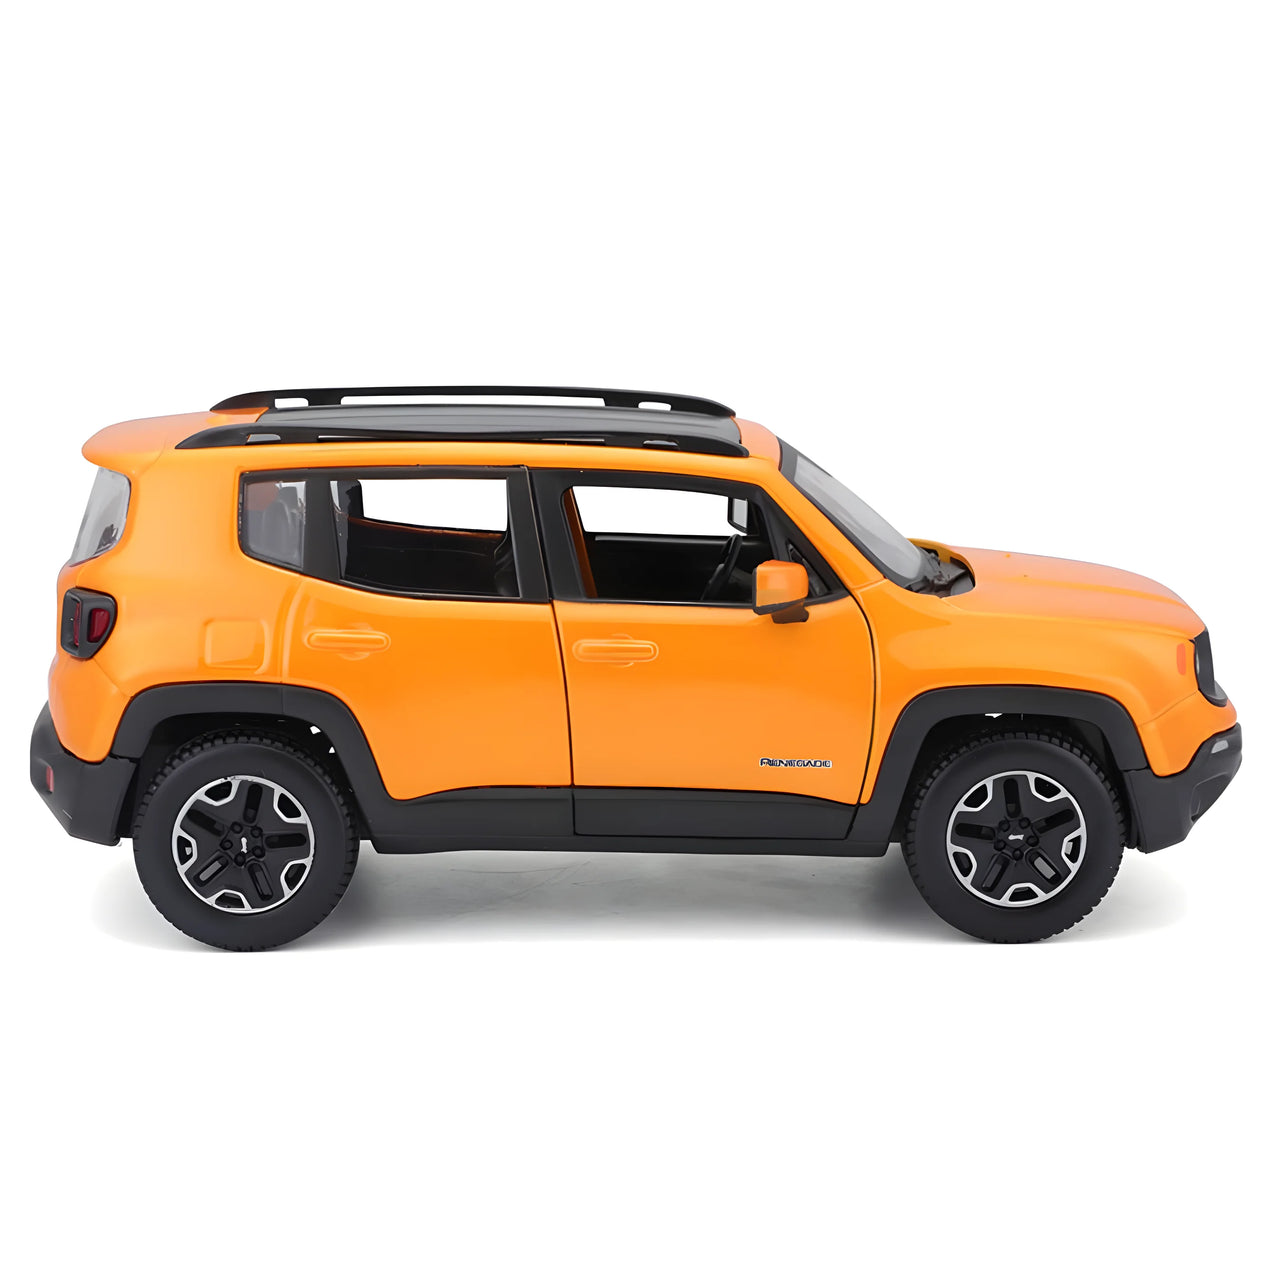 31282OR Car Jeep Renegade Year 2017 Scale 1:24 (Special Edition) (Pre Sale)